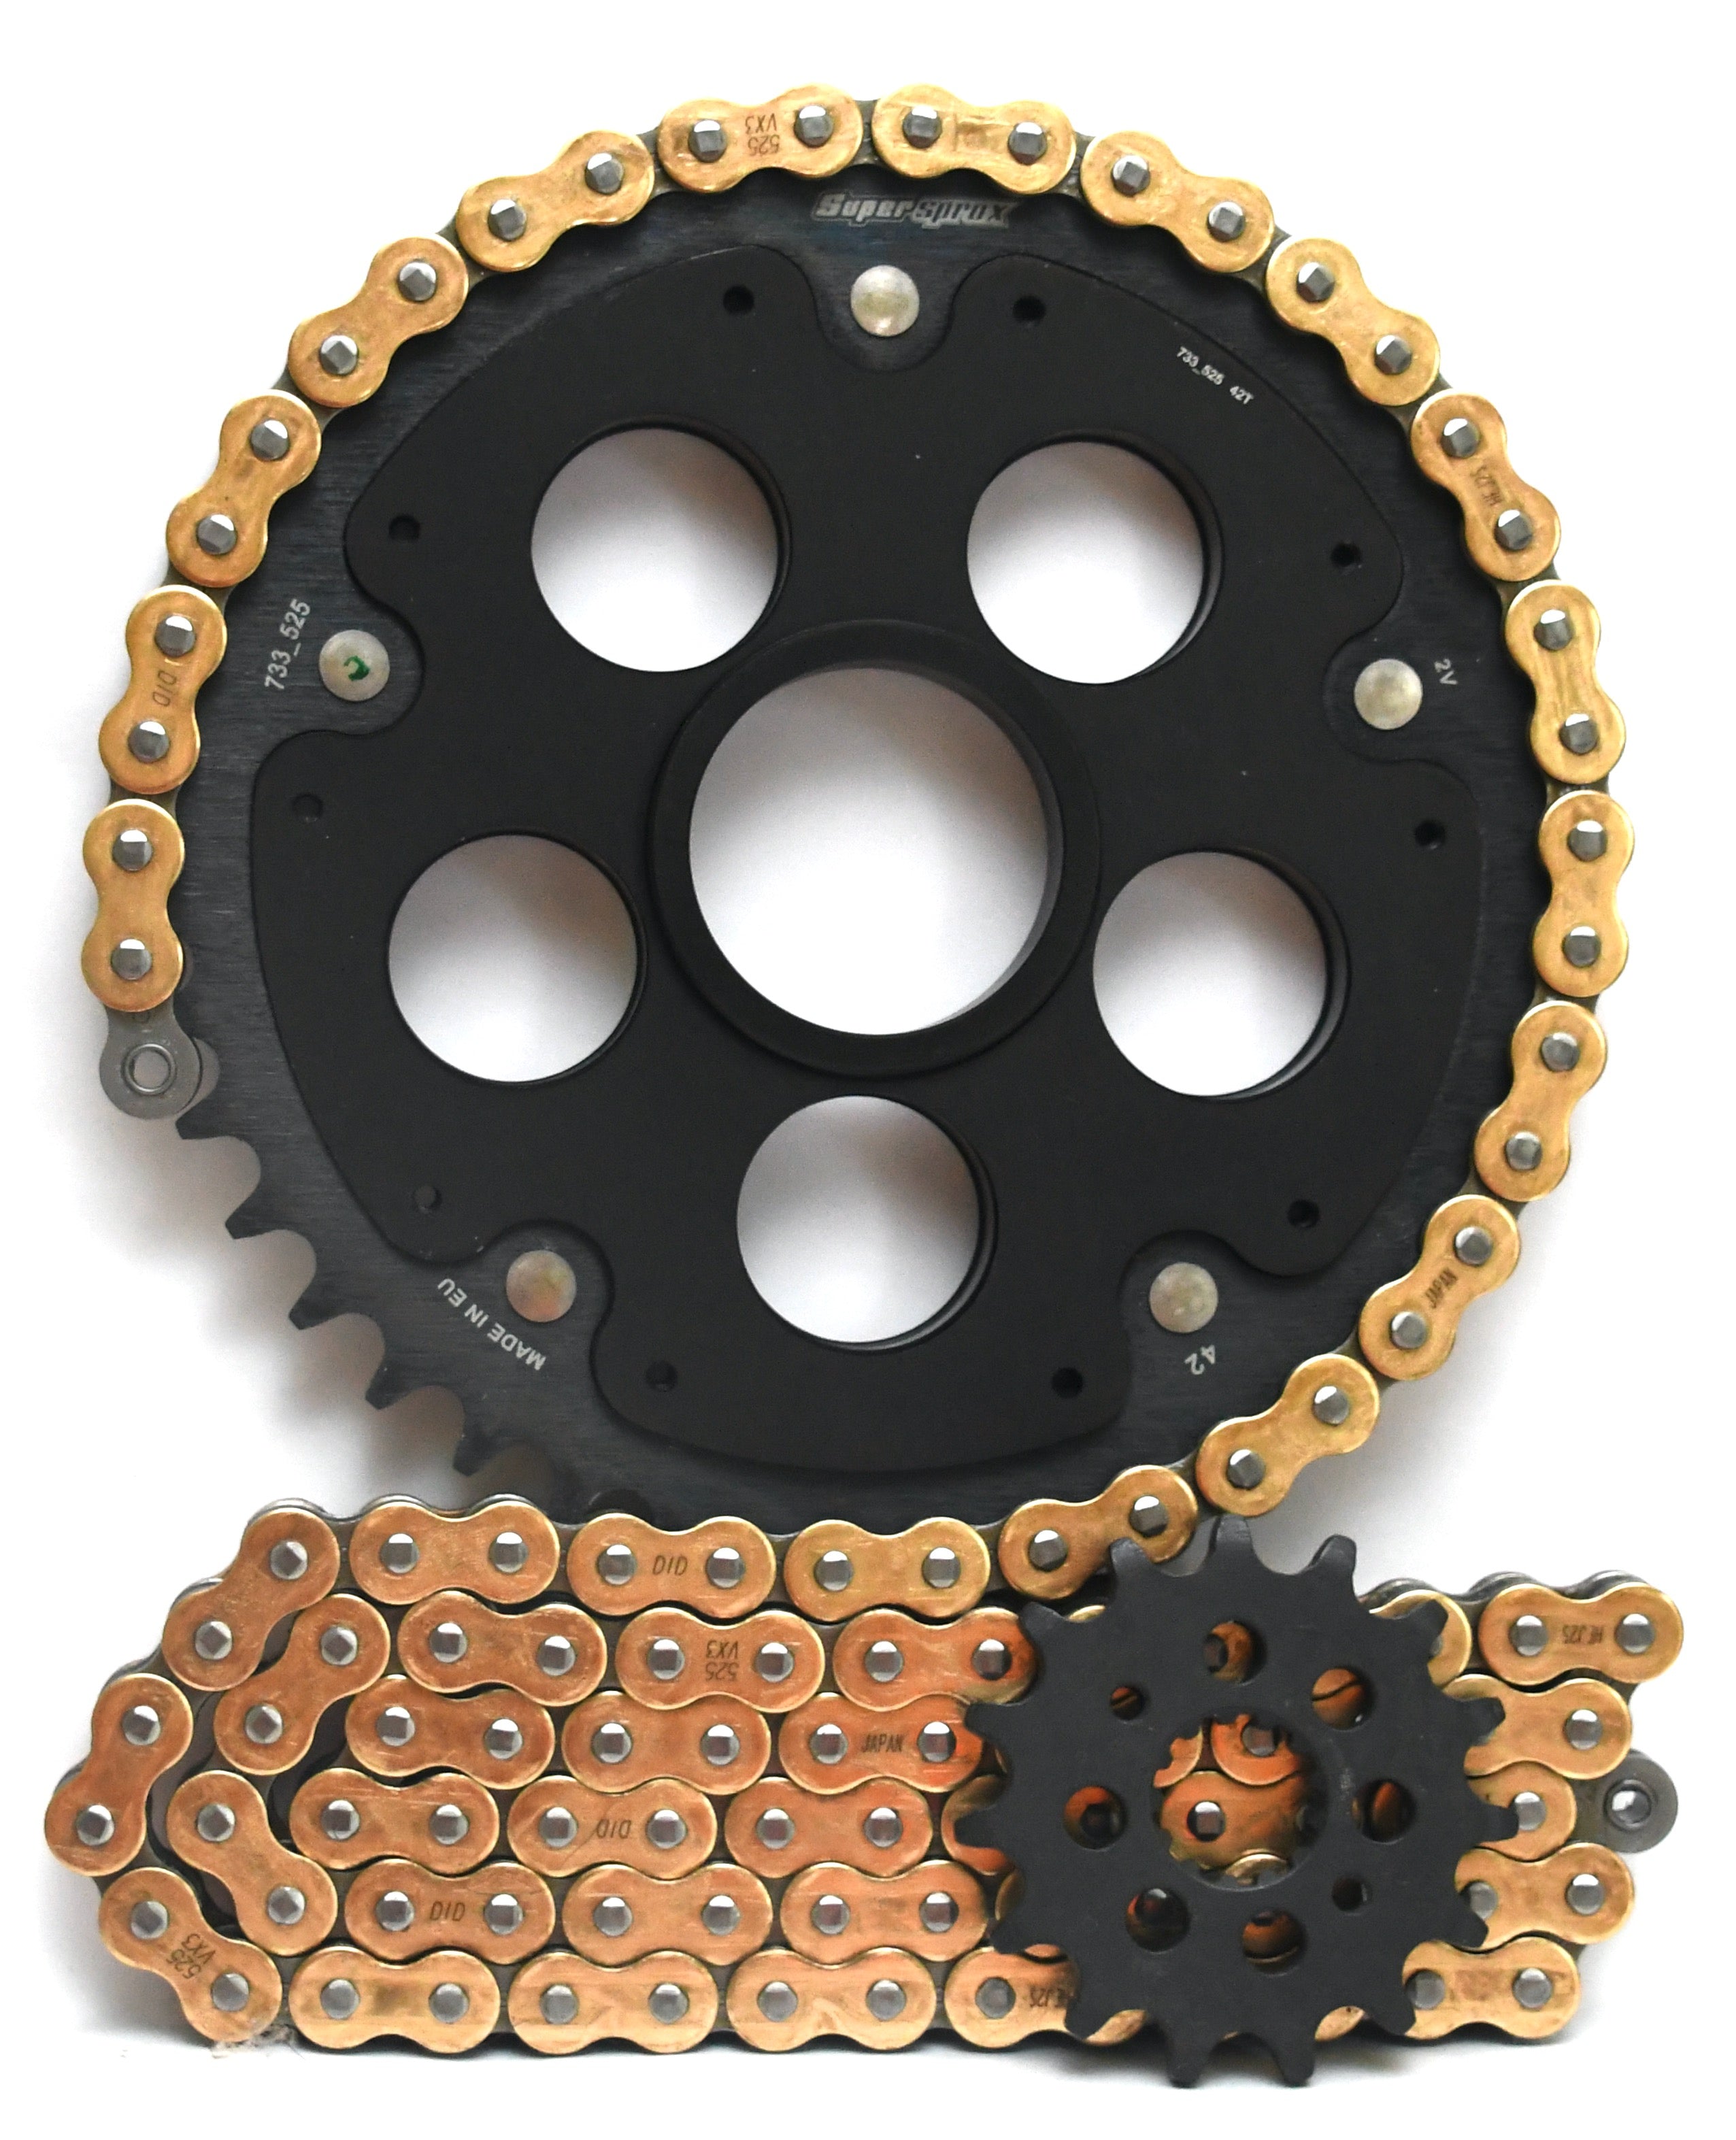 Supersprox Chain & Sprocket Kit for Ducati Monster 796 2010-2014 - Standard Gearing